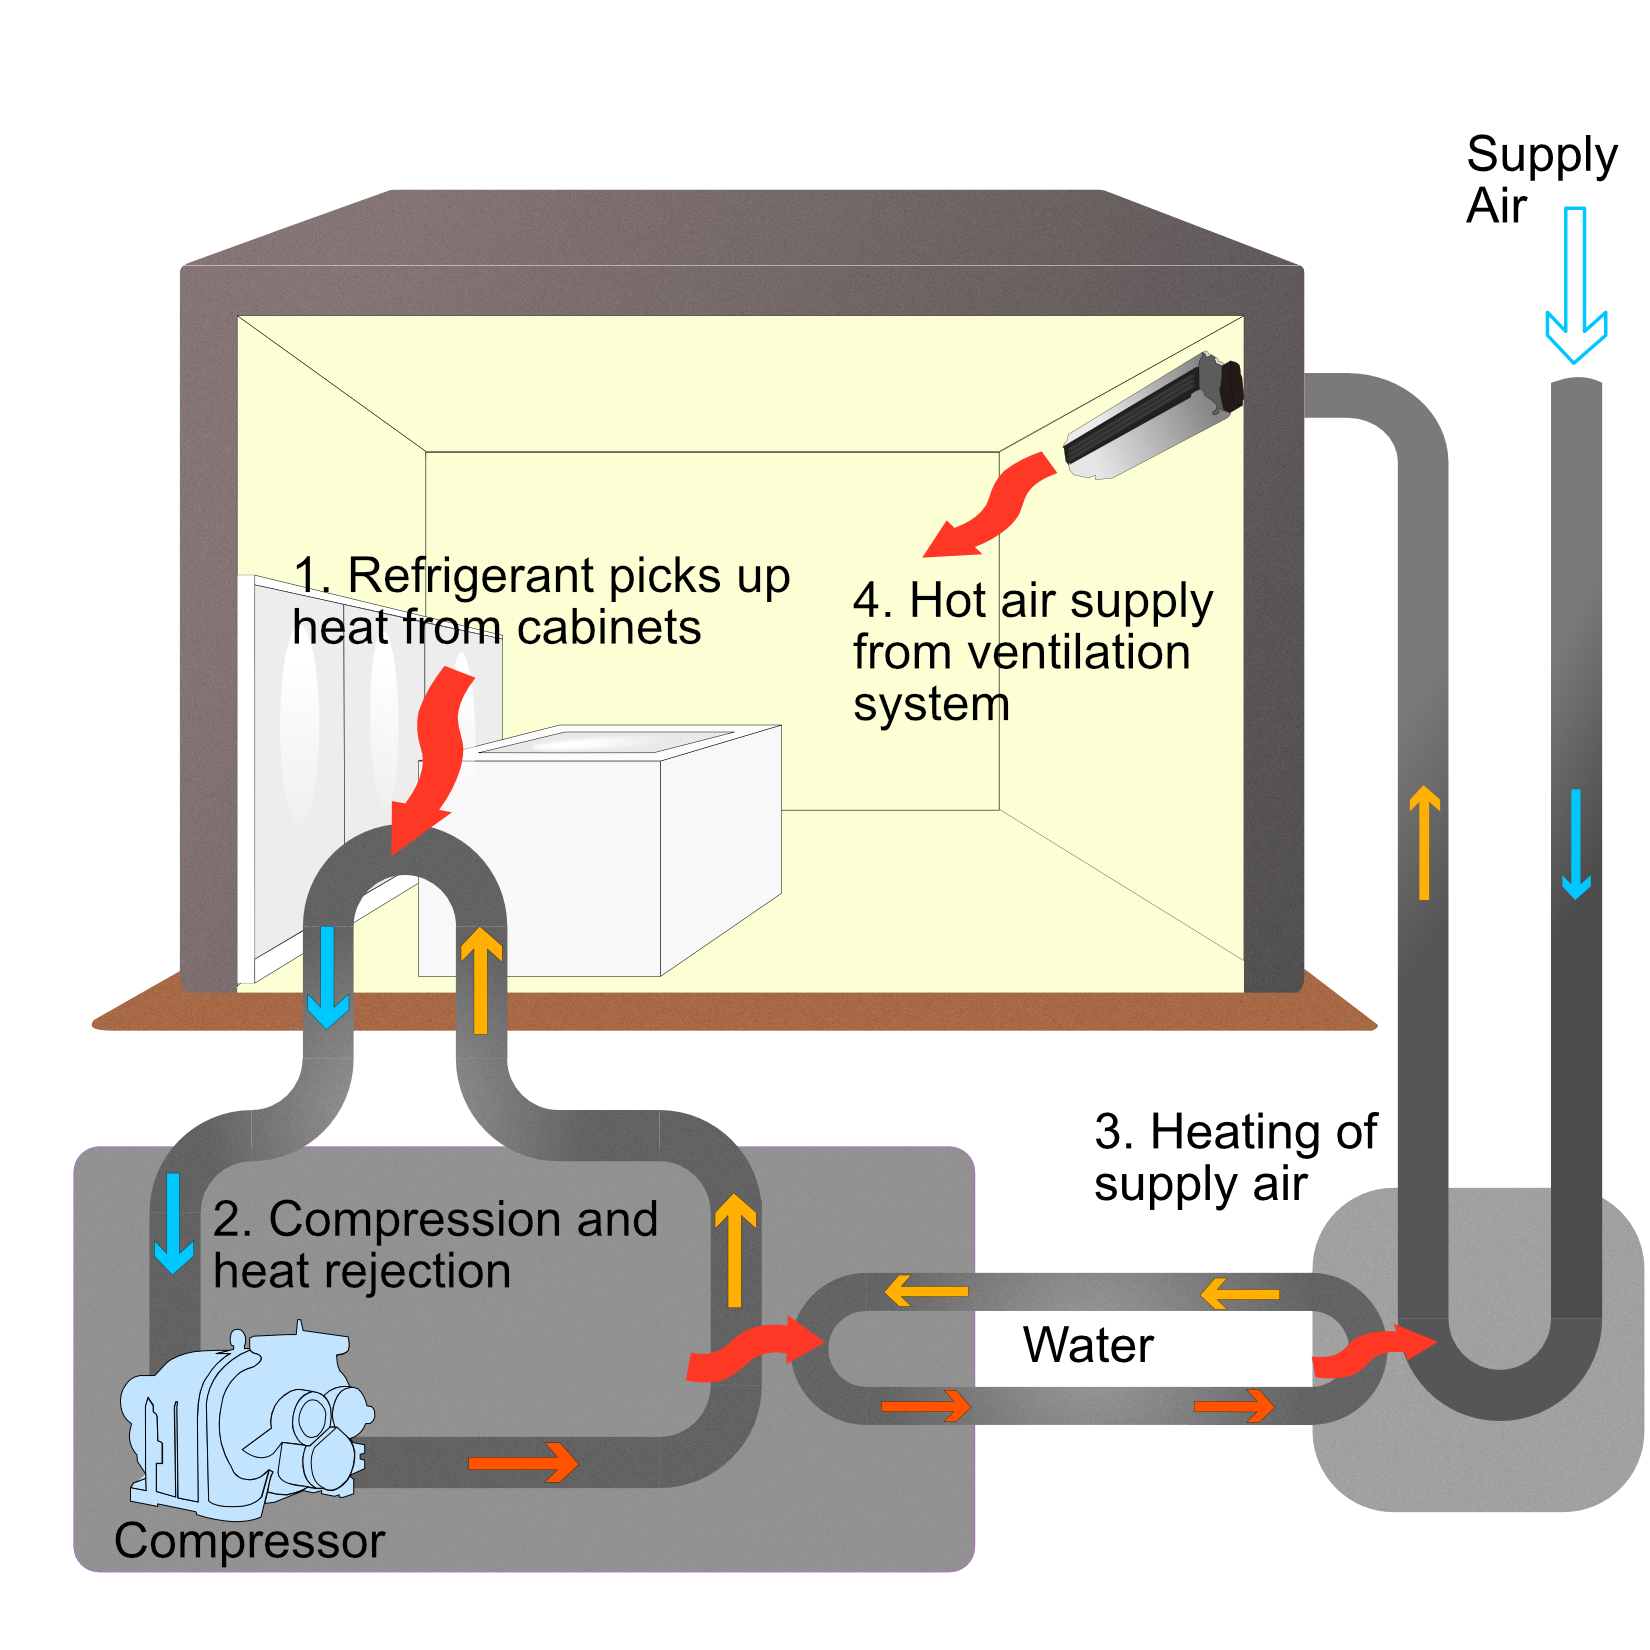 Heat recovery from supermarkets